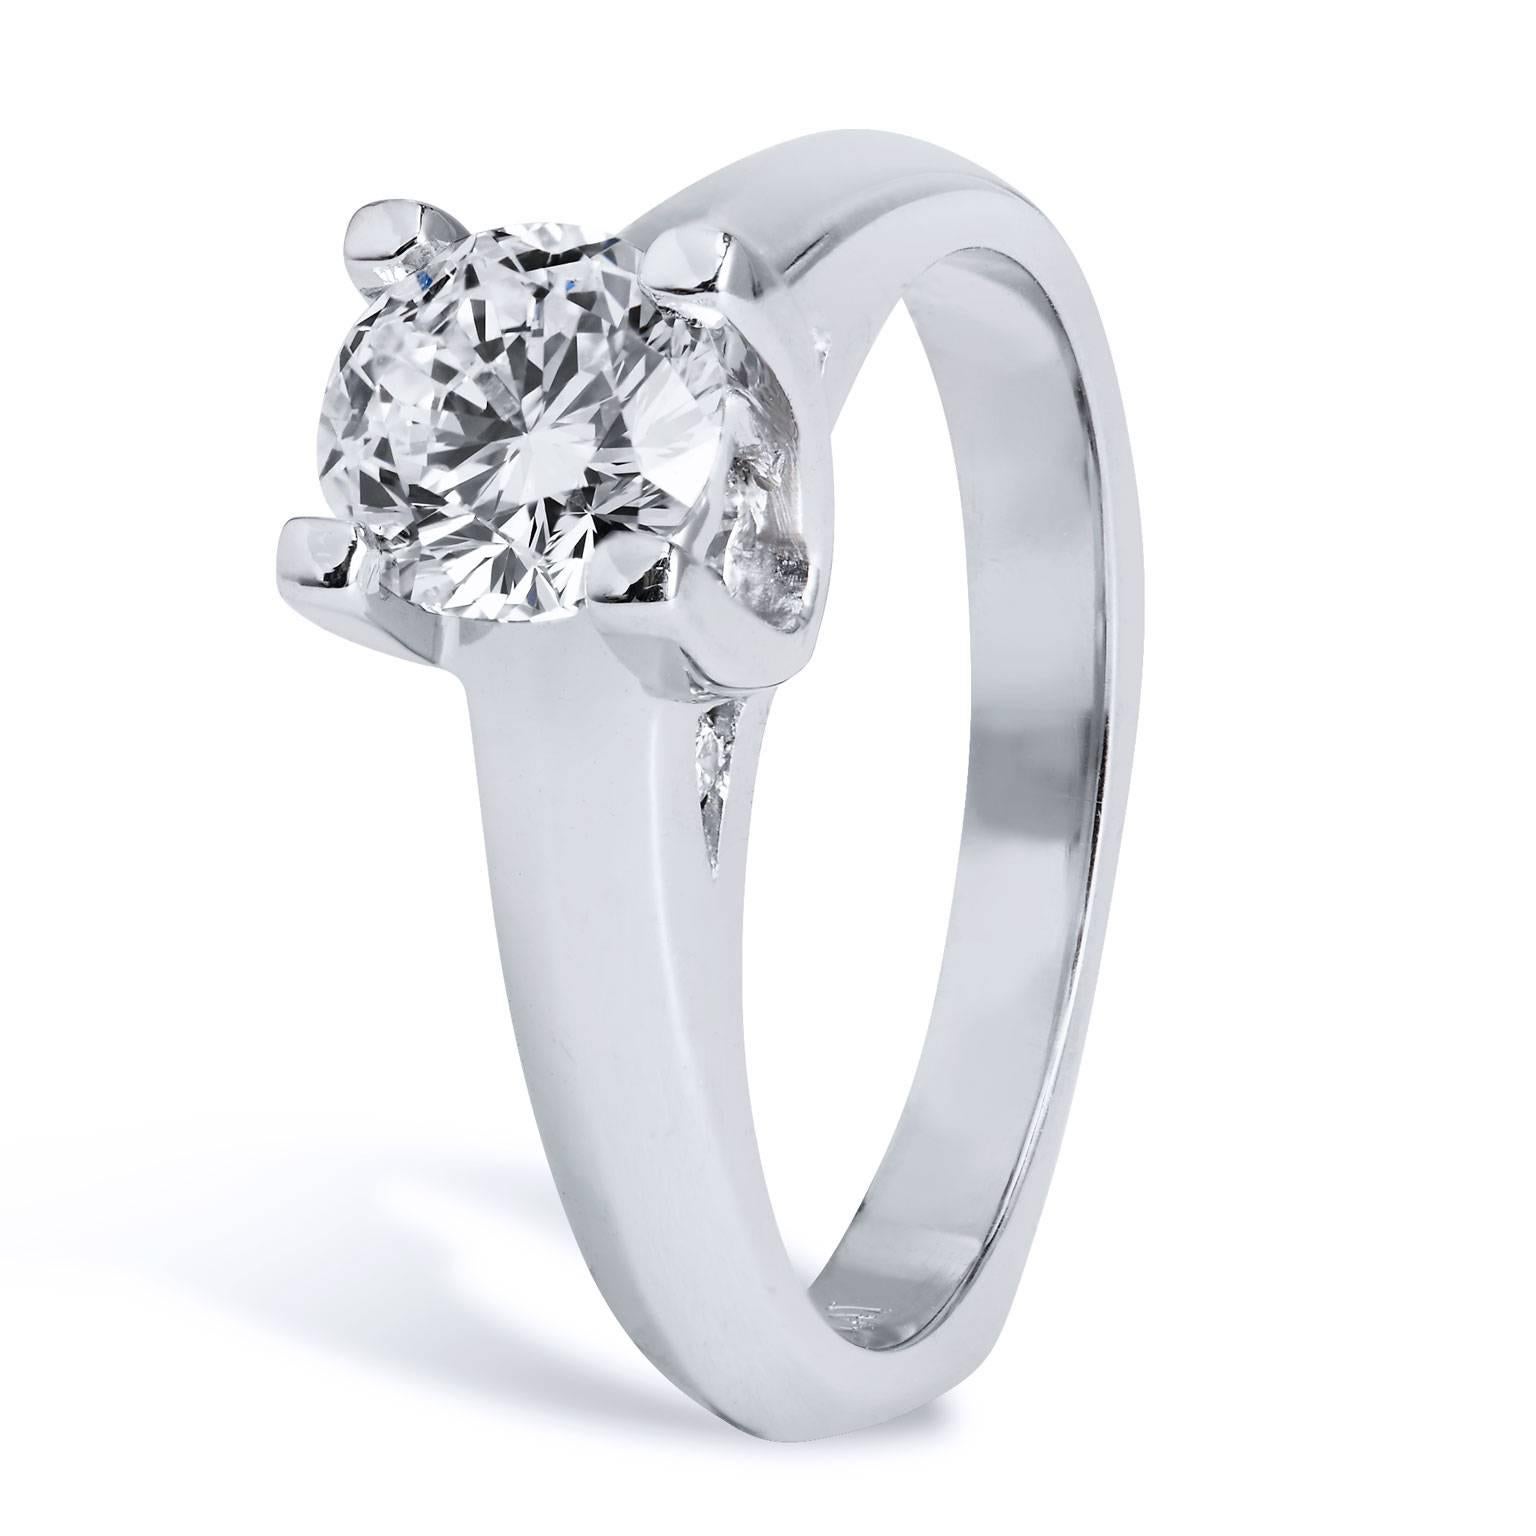 Breathtaking natural beauty defines this gorgeous engagement ring with its timeless design and its quality grade color and clarity. This previously loved diamond solitaire engagement ring features a 0.98 carat GIA certified round brilliant cut